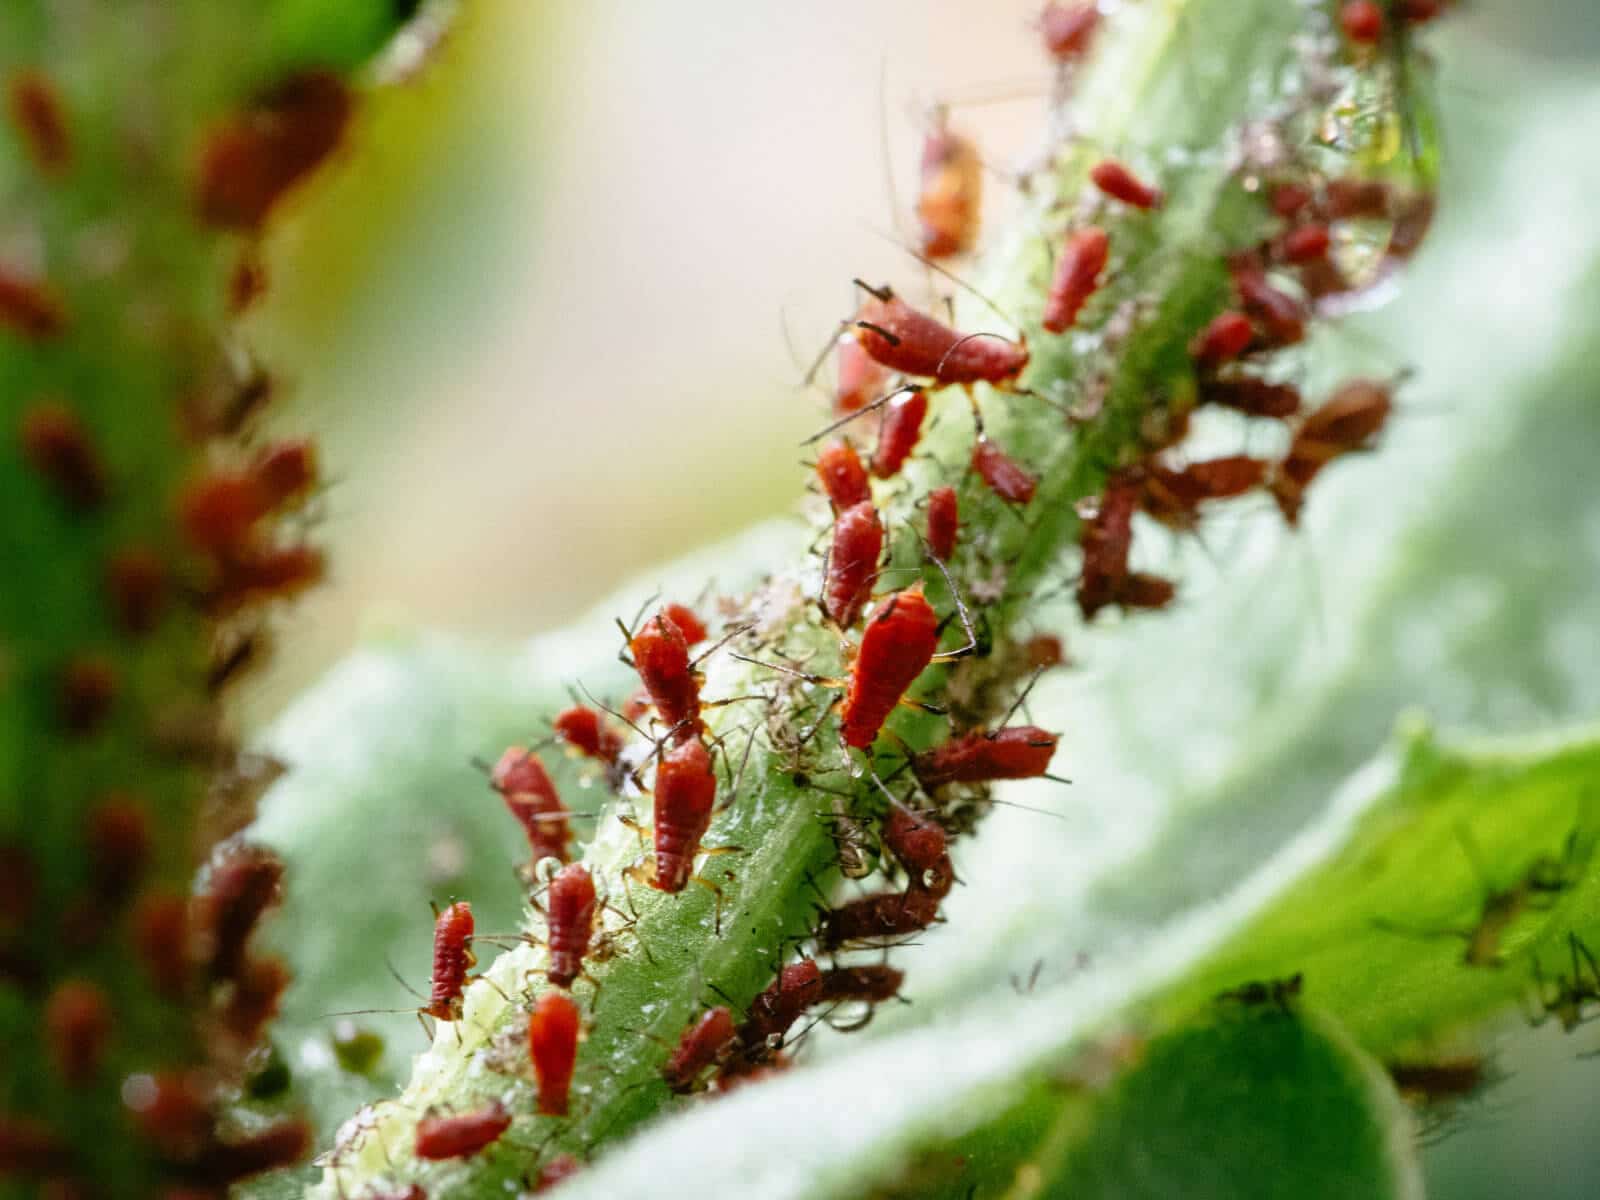 How to control aphids organically